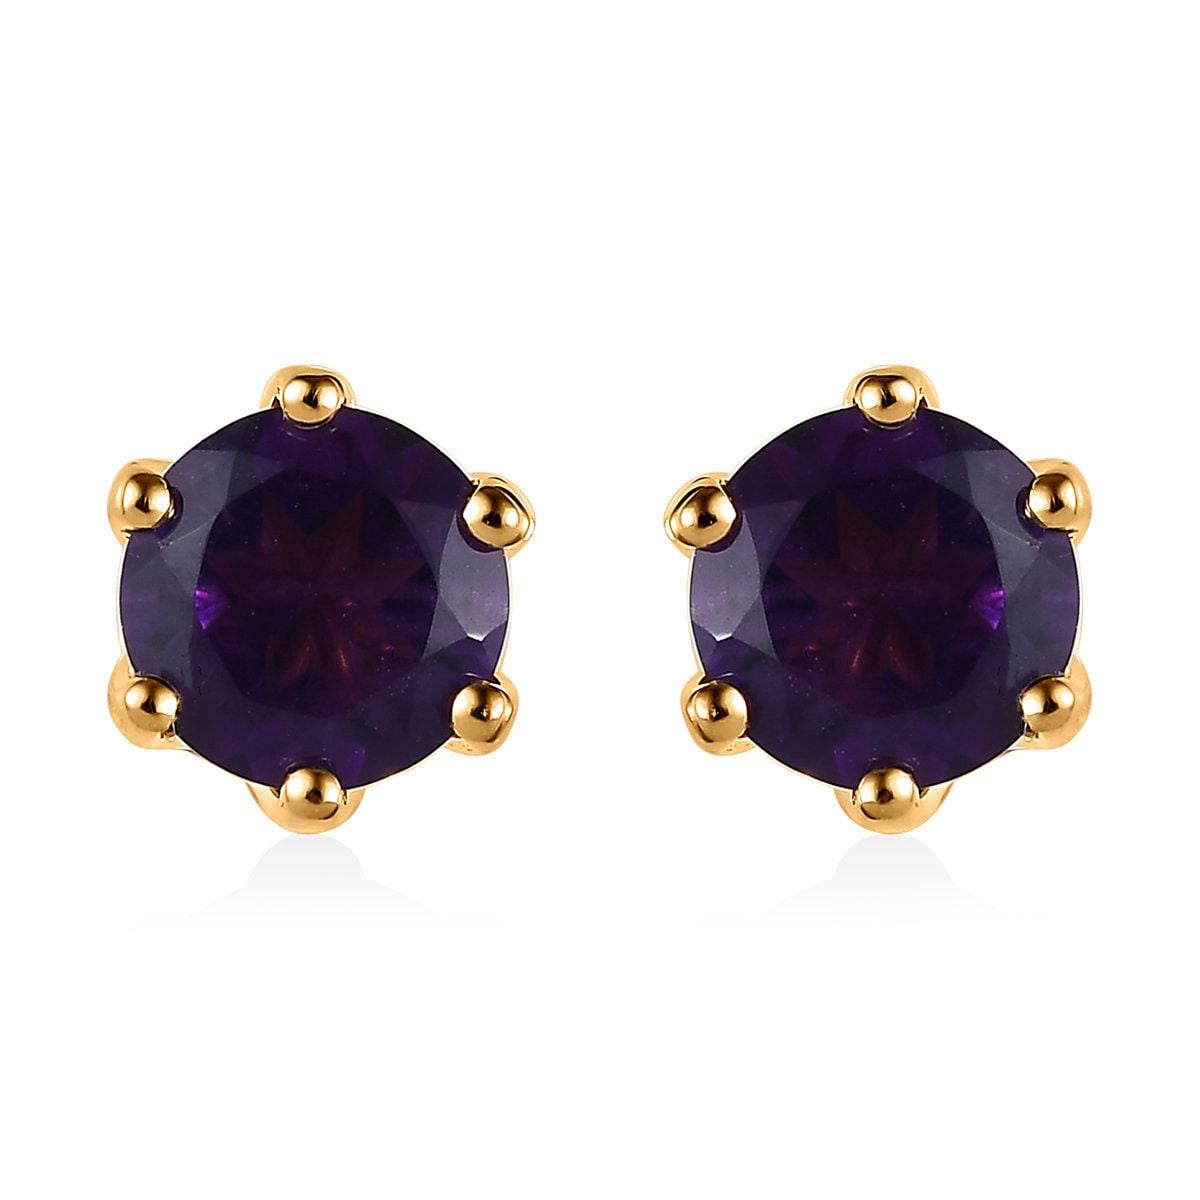 AAA Amethyst Round Studs earrings, 925 Sterling Silver, 6 Prong Stud, 18K Gold Plated, Round Studs by Inspiring Jewellery - Inspiring Jewellery